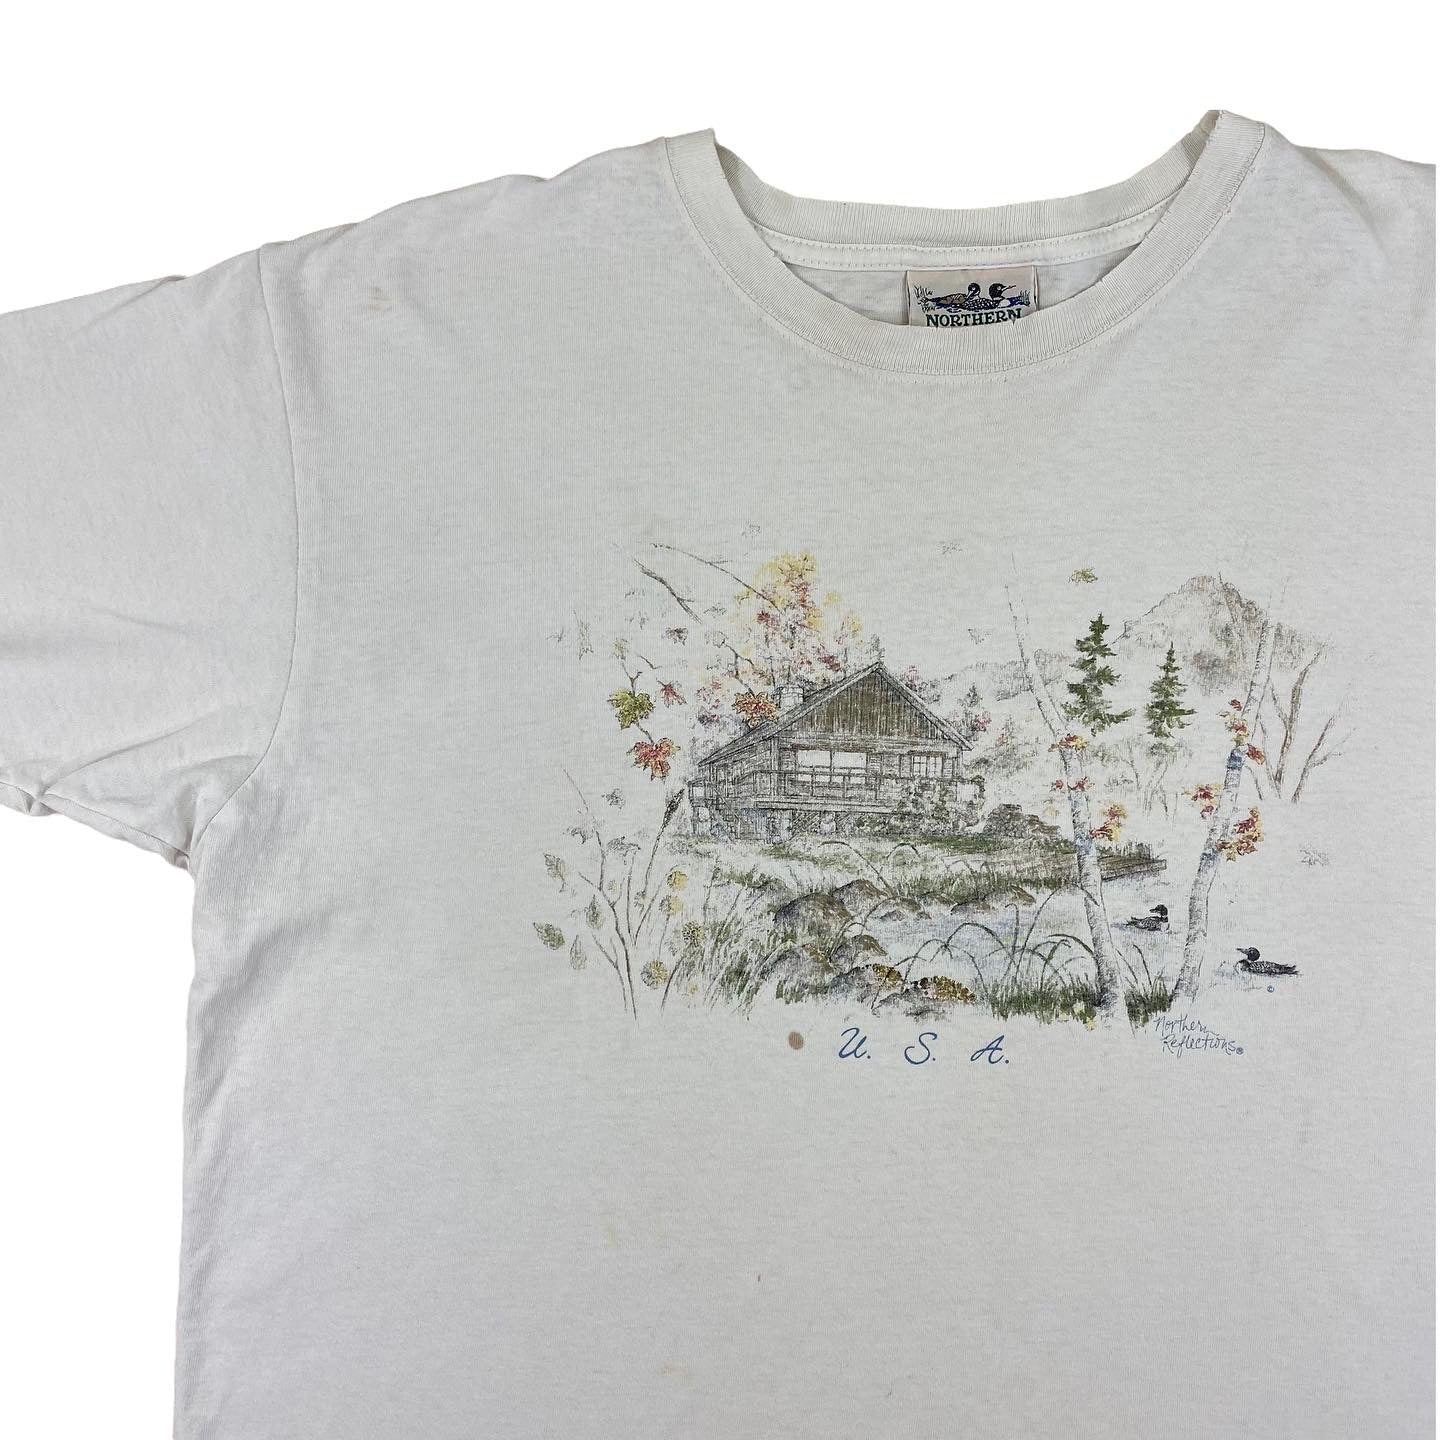 Maine camp tee. loons and birch trees. XL